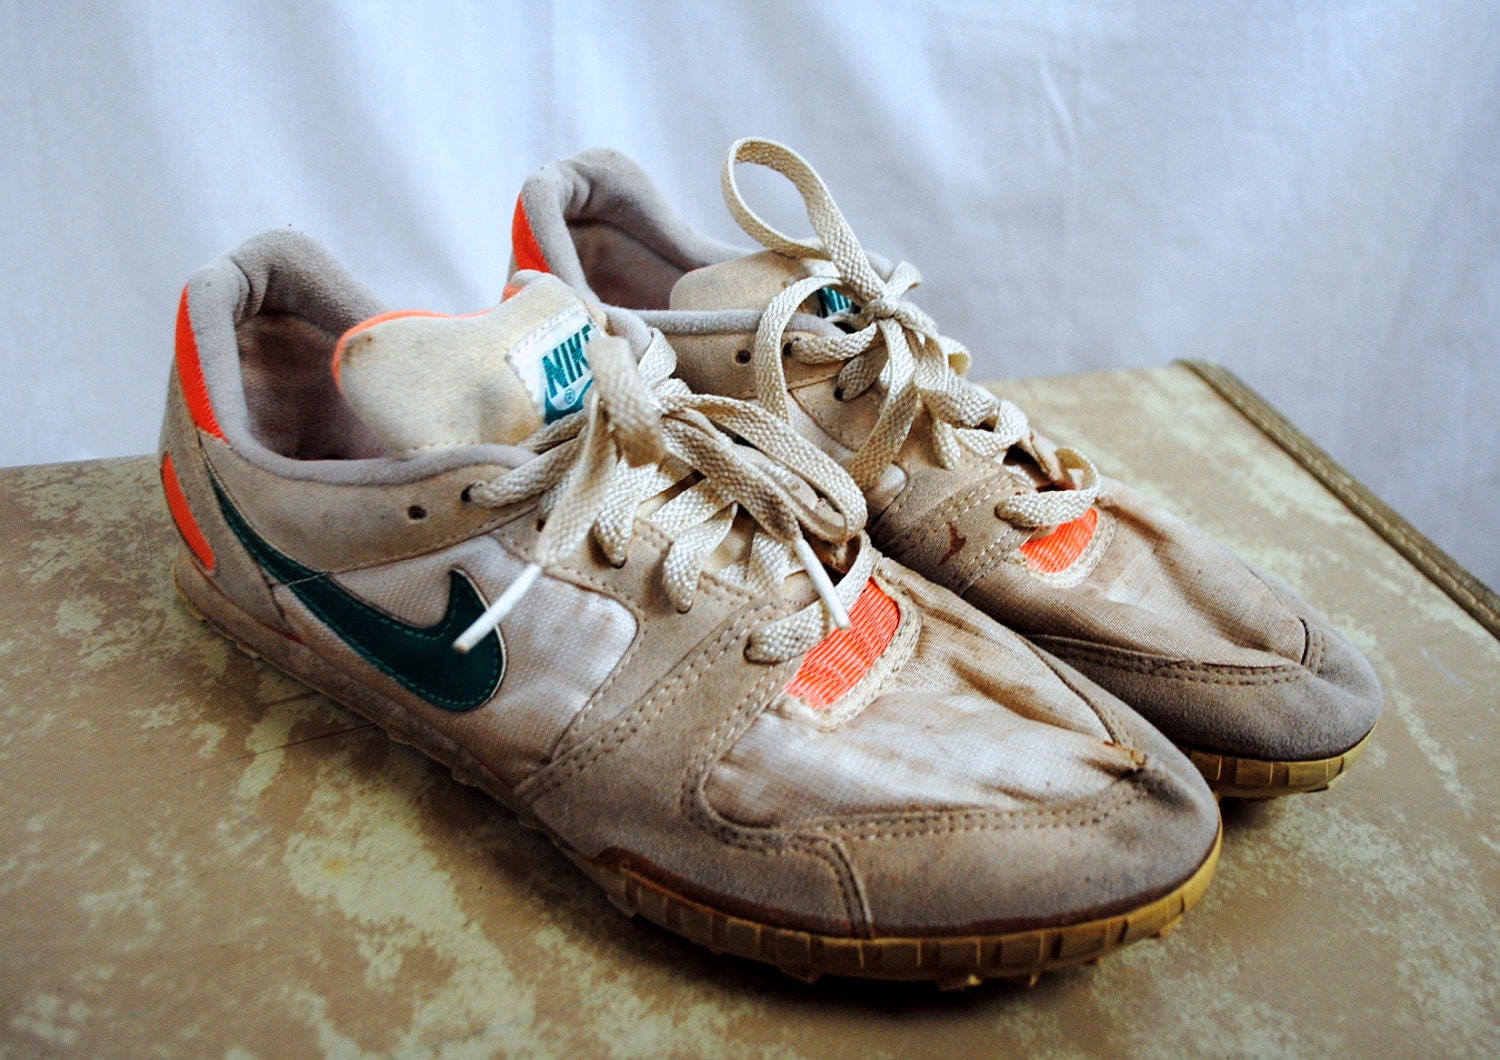 Beat Up Sneakers